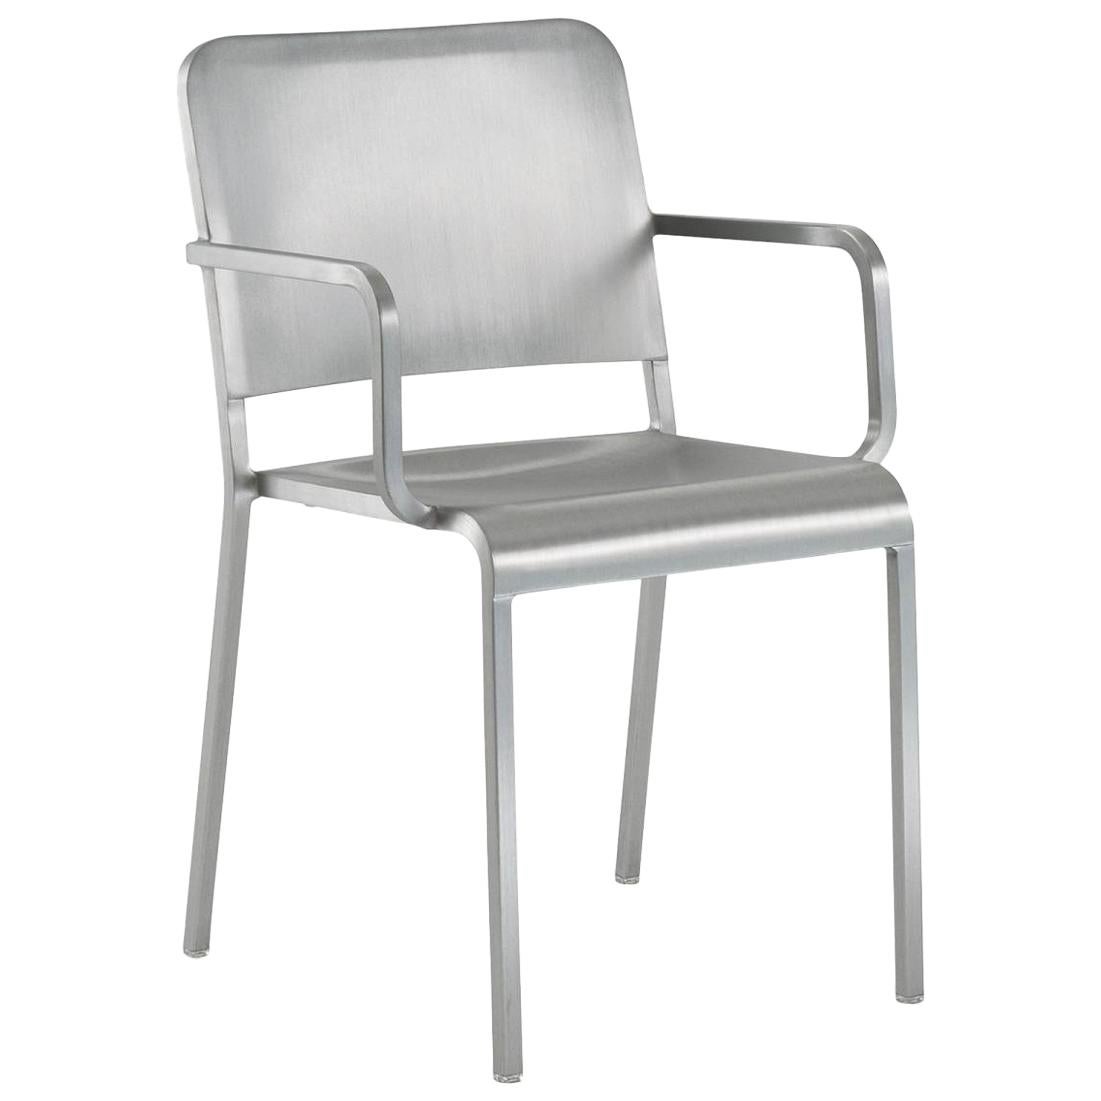 Emeco 20-06 Armchair in Brushed Aluminum by Norman Foster For Sale